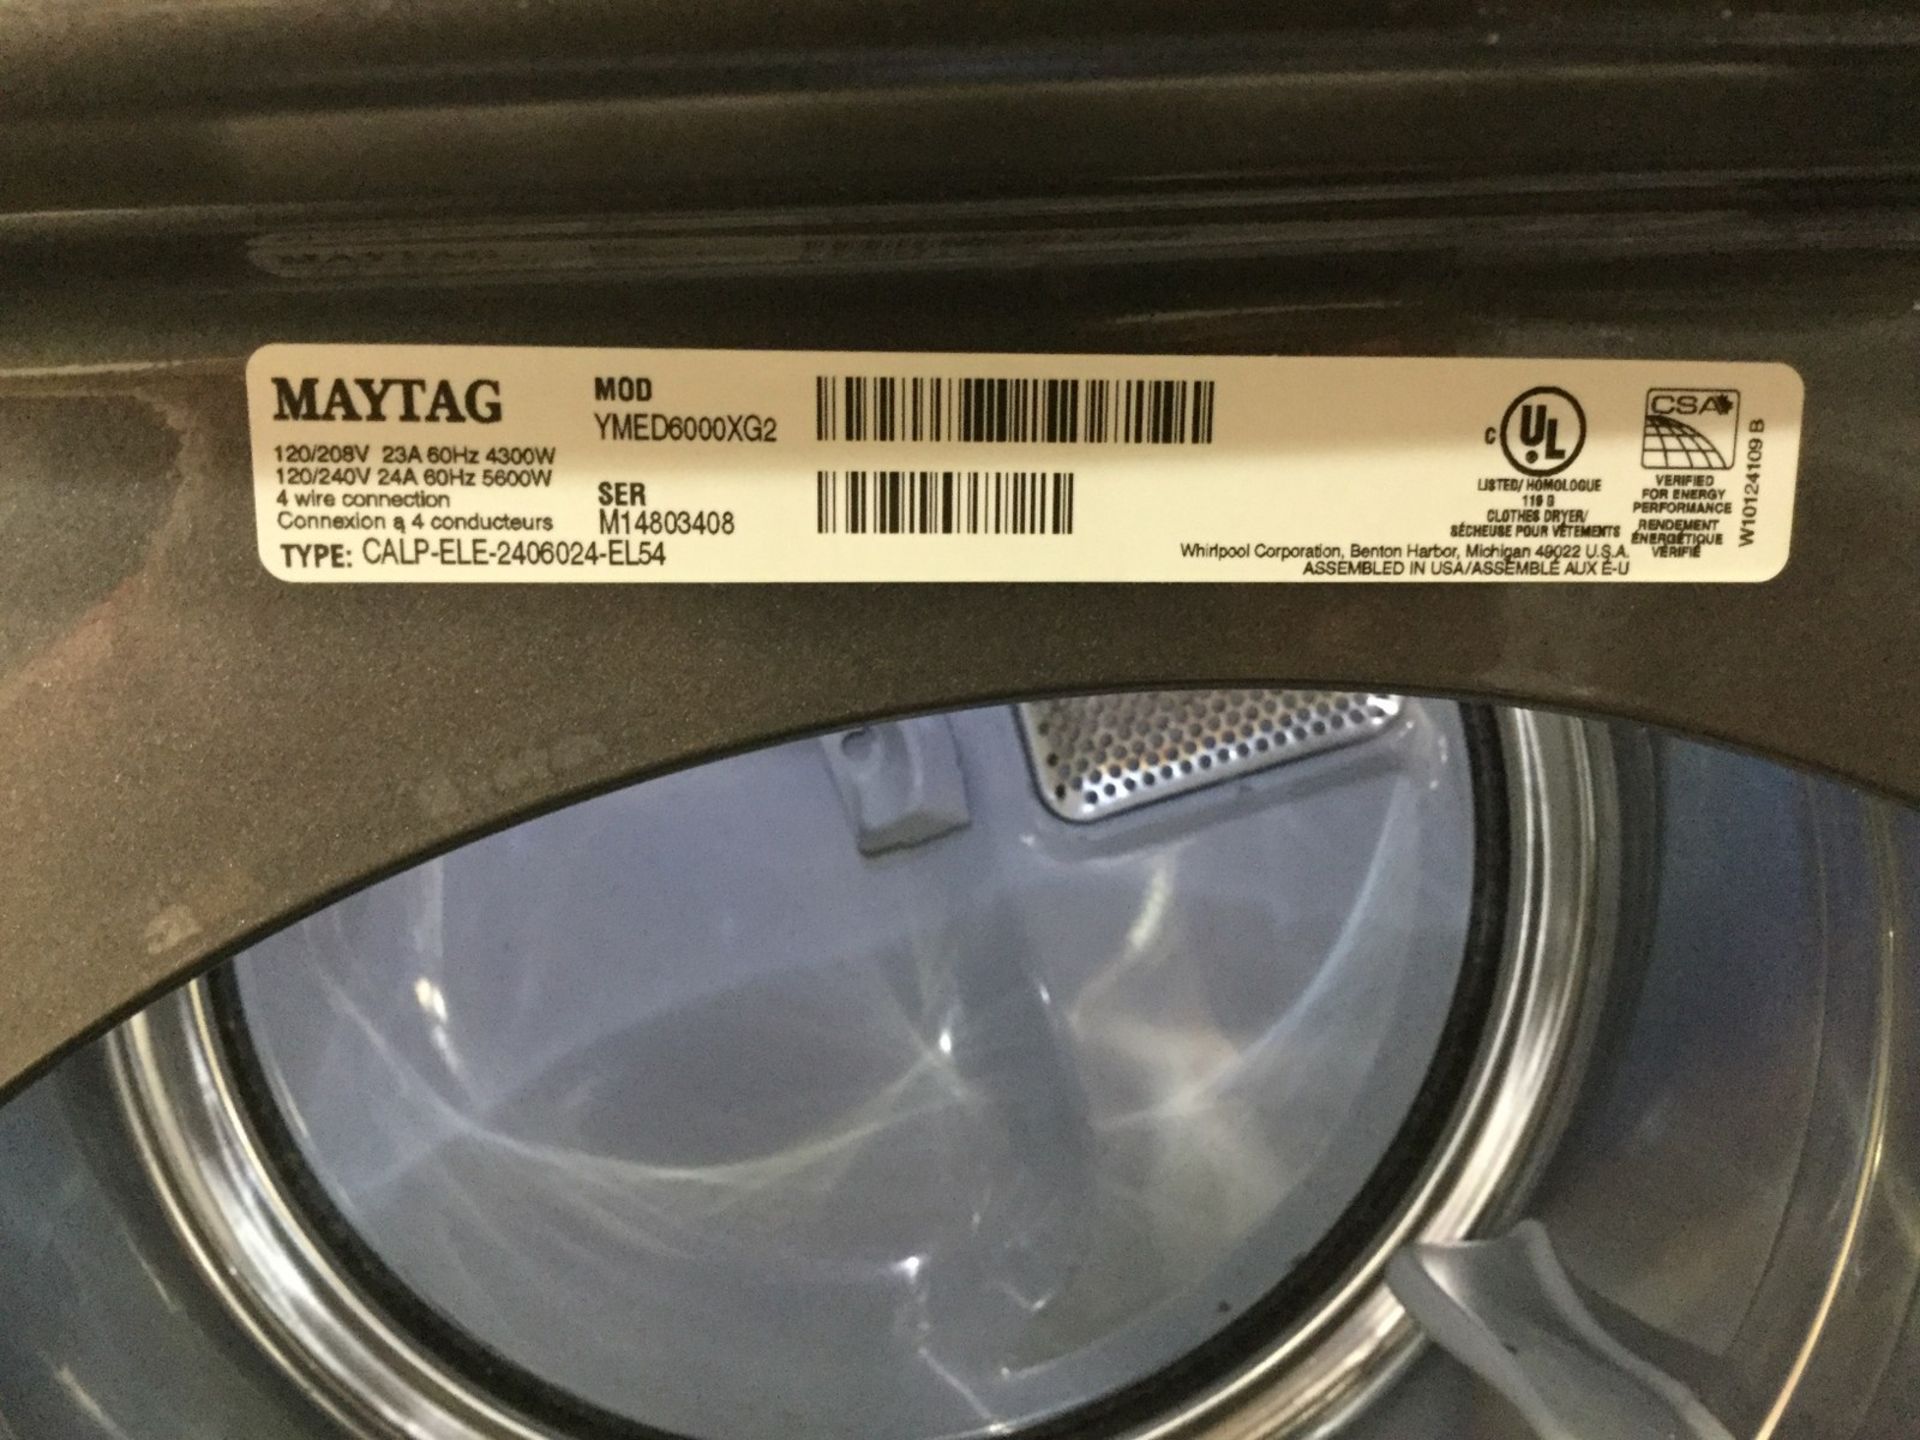 1 X MATAG - MAXIMA COMMERCIAL DRYER - MODEL # YMED60000XG2 - Image 2 of 2